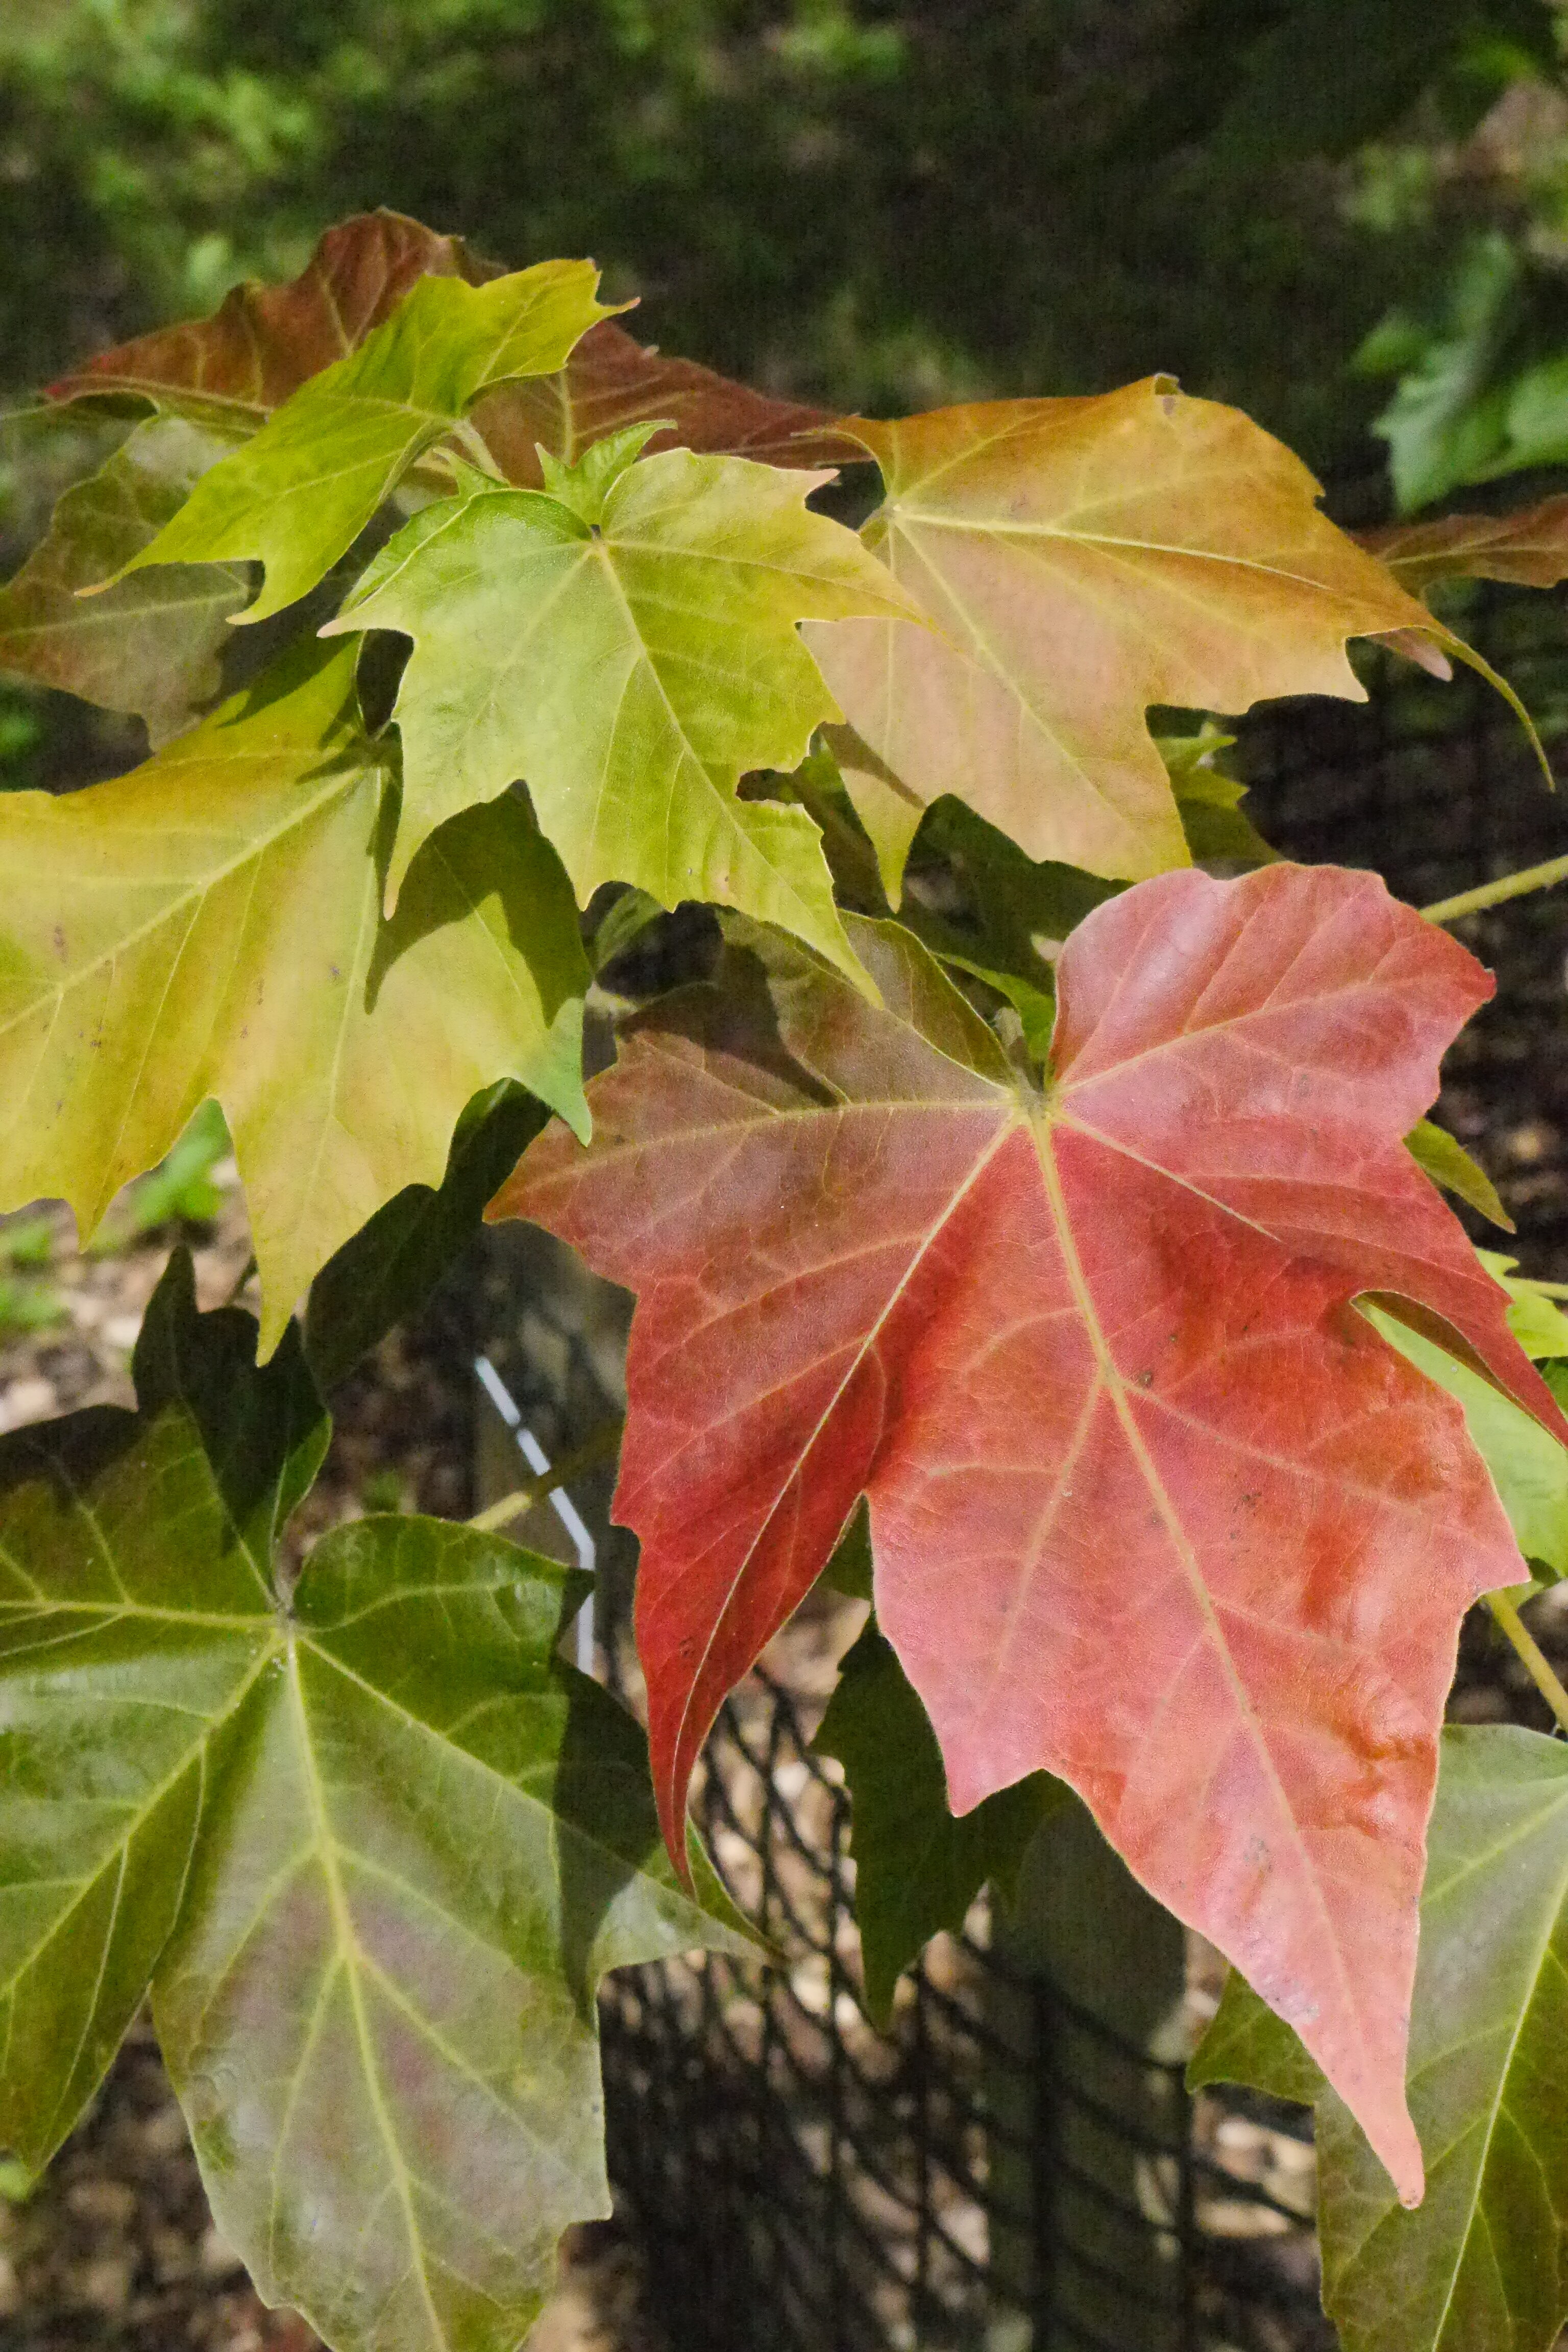 The critically endangered Acer amamiense in the collection at Westonbirt Arboretum, Gloucestershire (Dan Crowley)